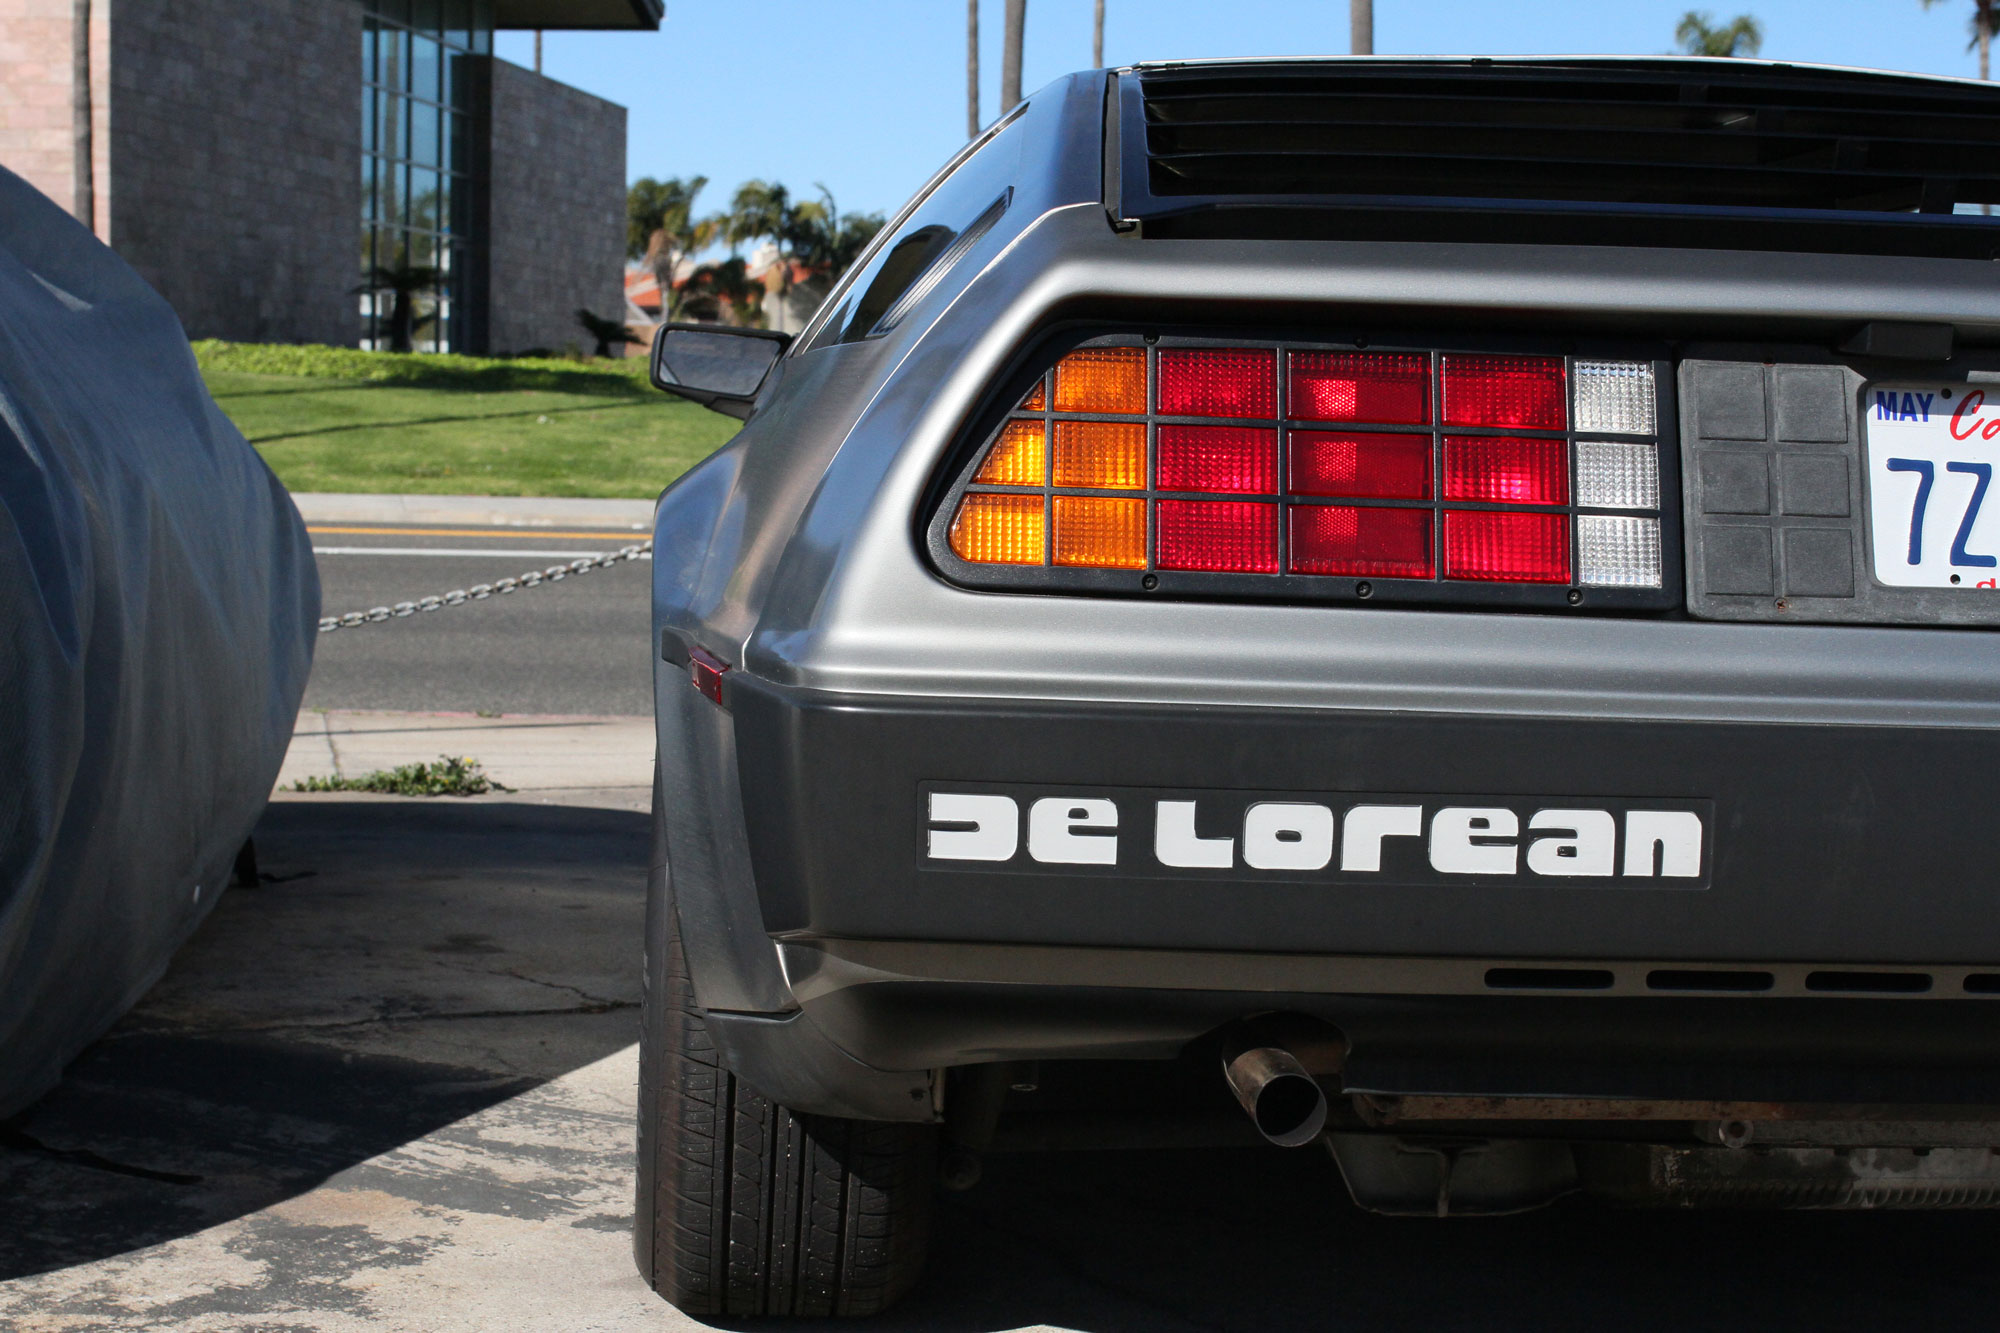 The rear of the AMC DeLorean - 1981 beside Highway One